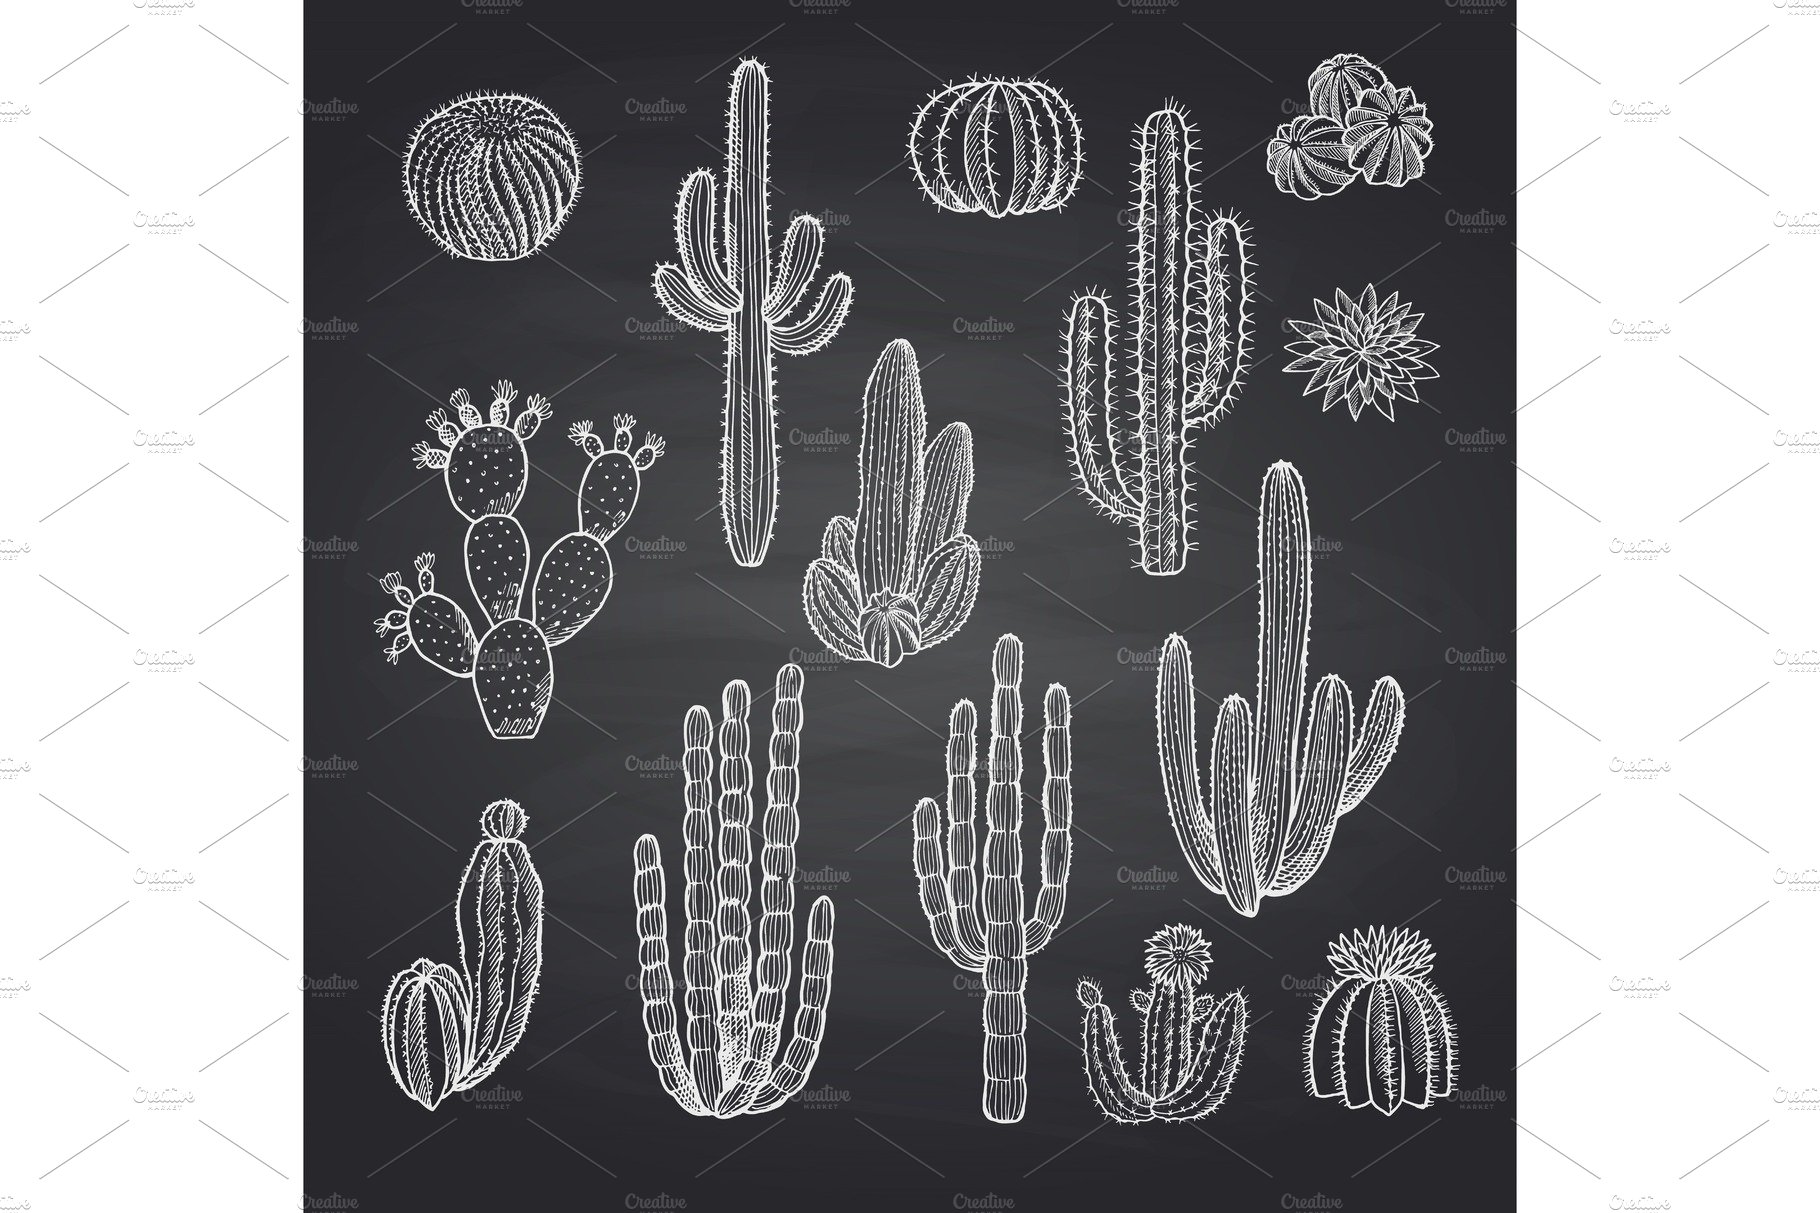 Chalkboard drawing of different kinds of cacti.